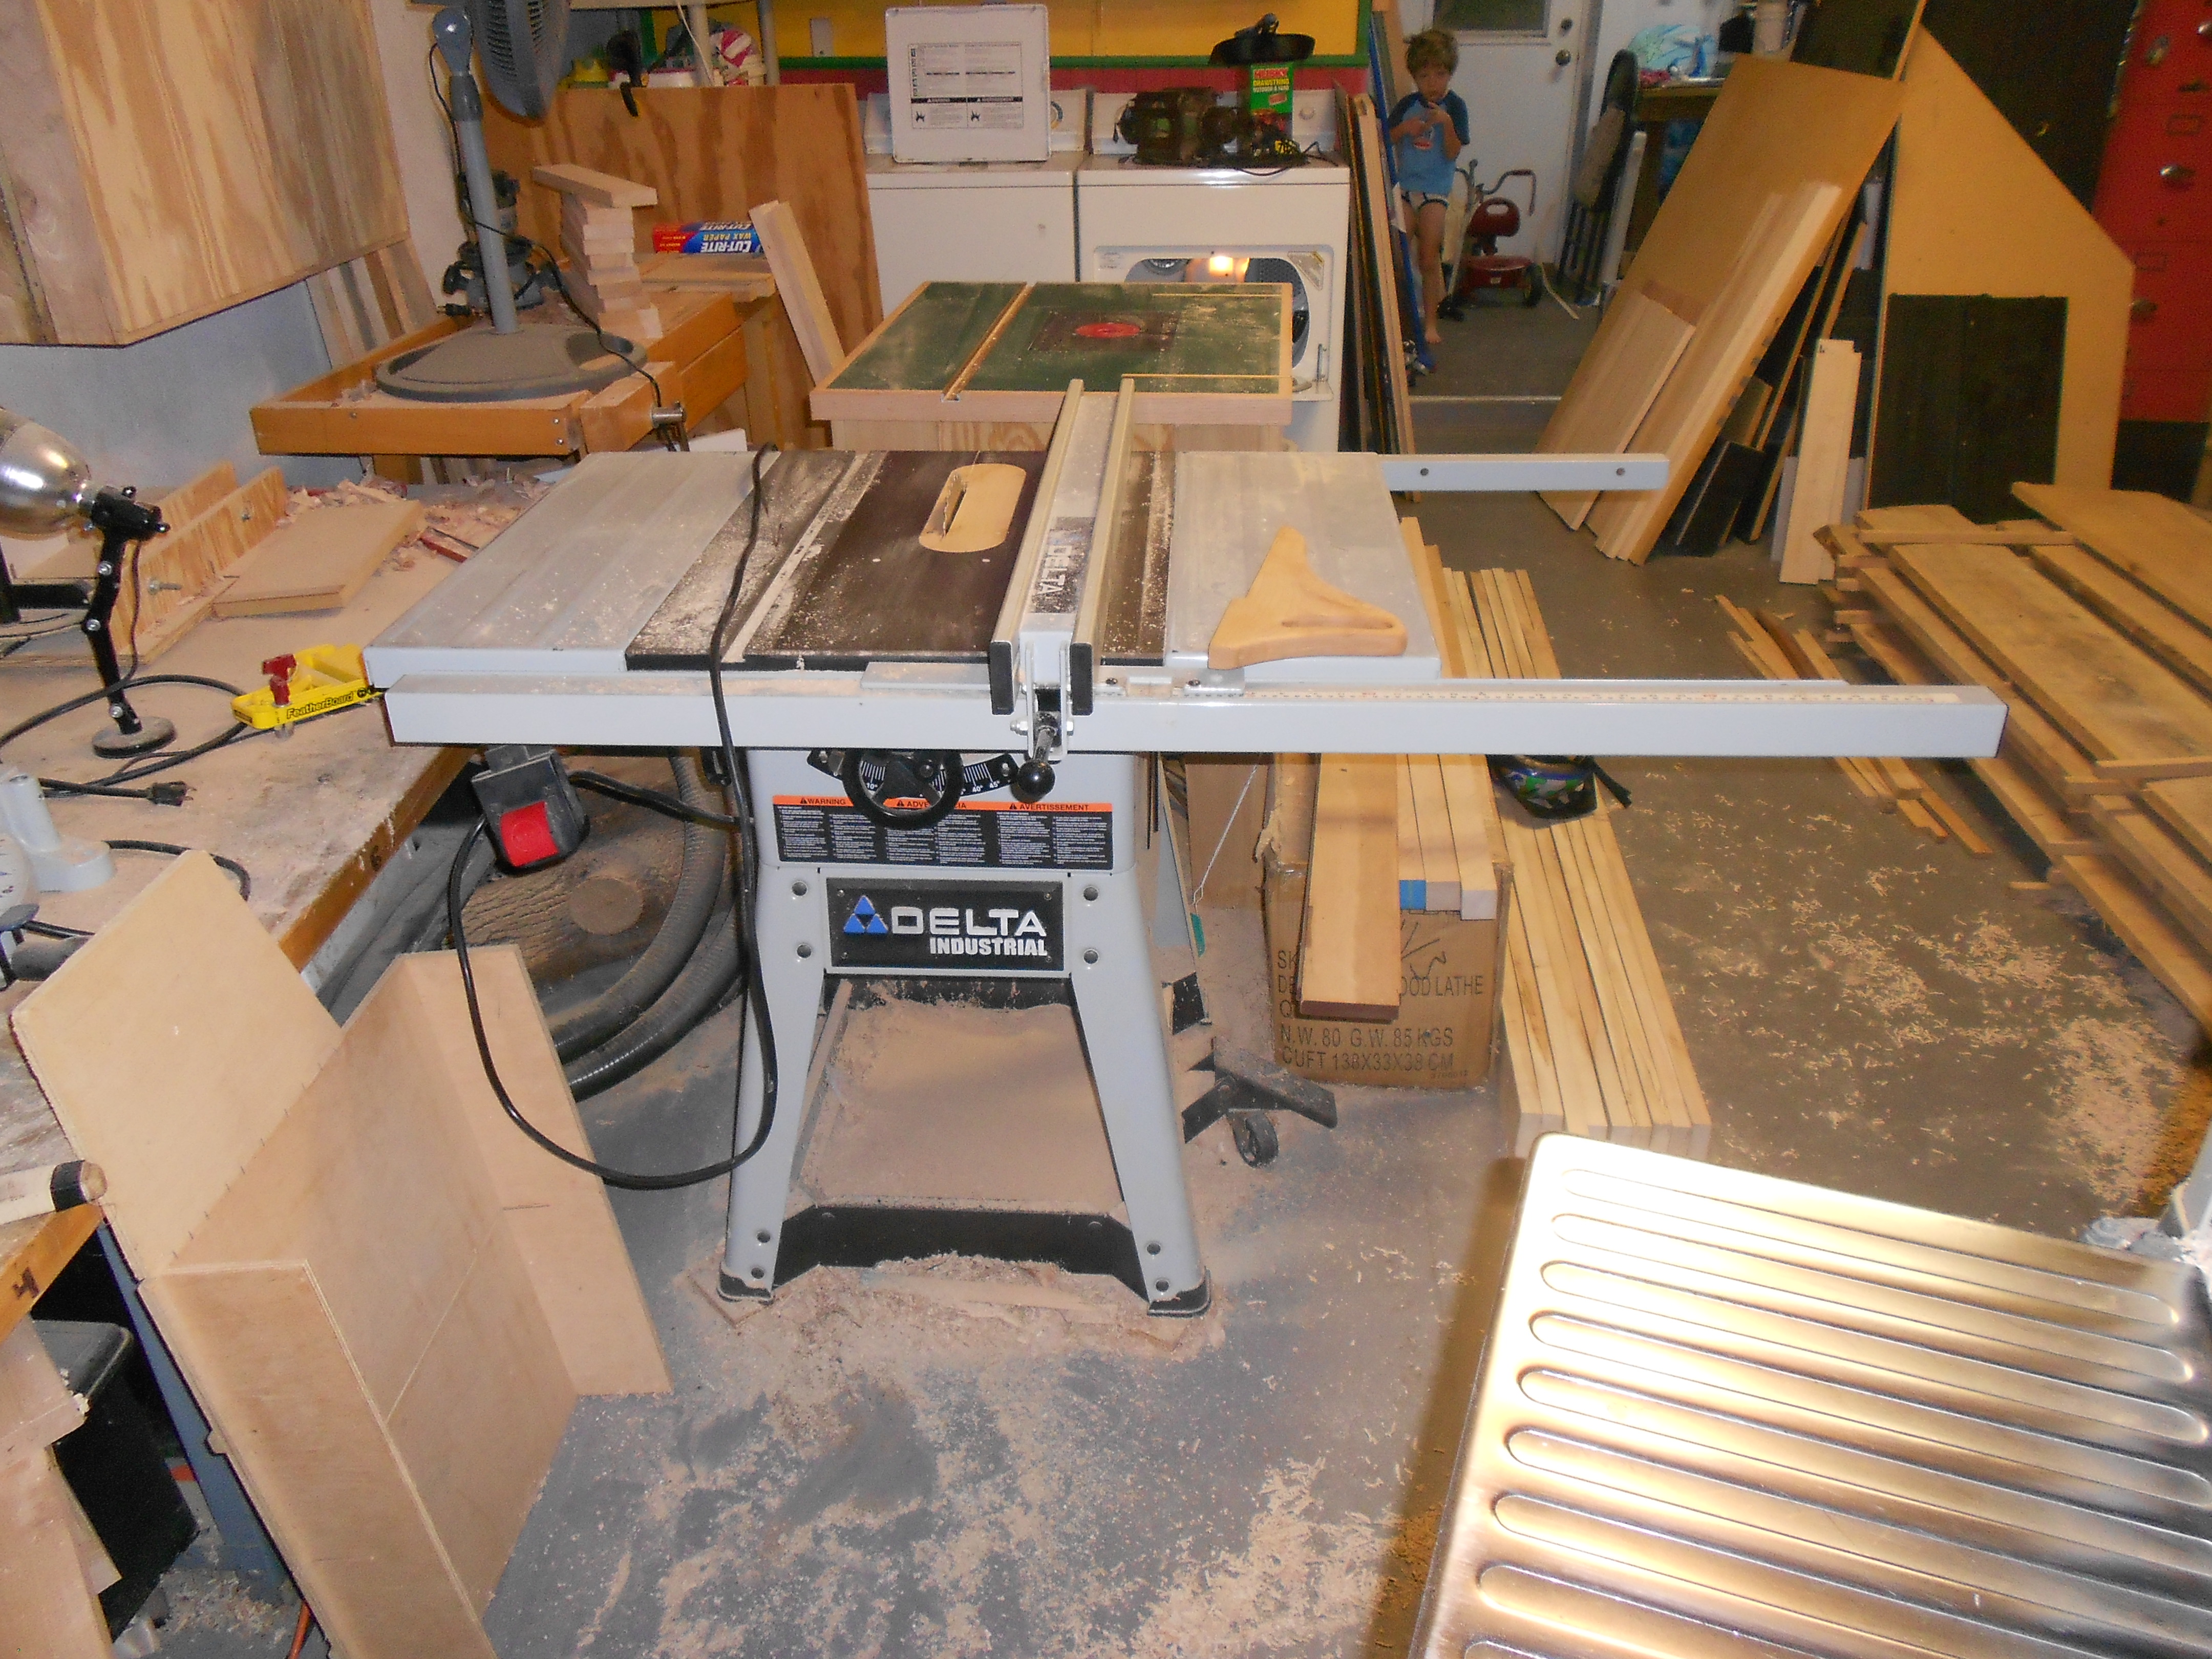 Table saw set up for ripping lumber to 4 1/2" laminate strips